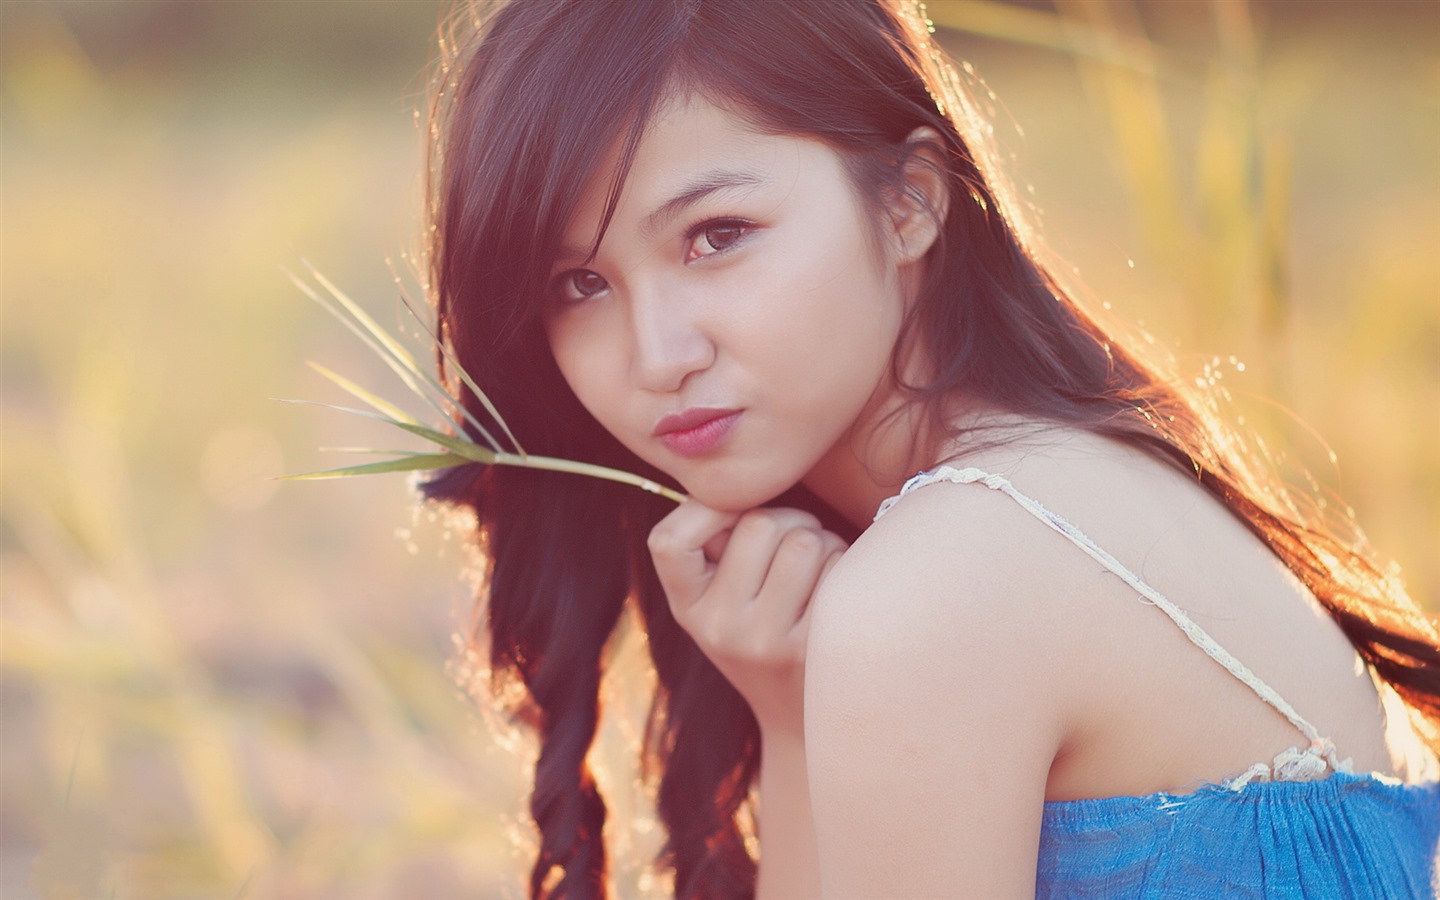 Pure and lovely young Asian girl HD wallpapers collection (5) #35 - 1440x900